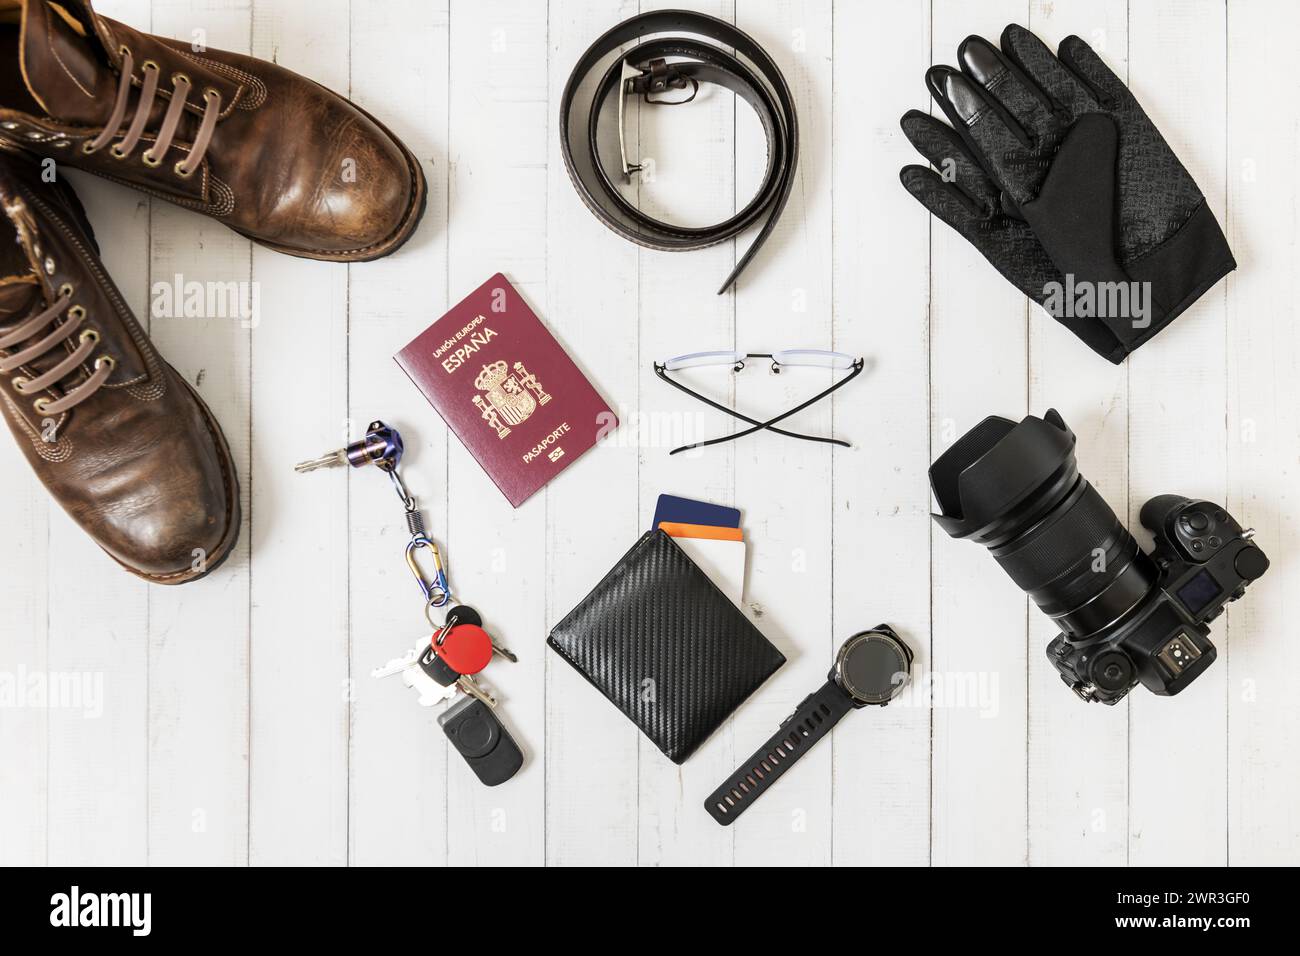 Still life with hiking boots, camera, Spanish passport, carbon fiber wallet and winter gloves on a white surface Stock Photo